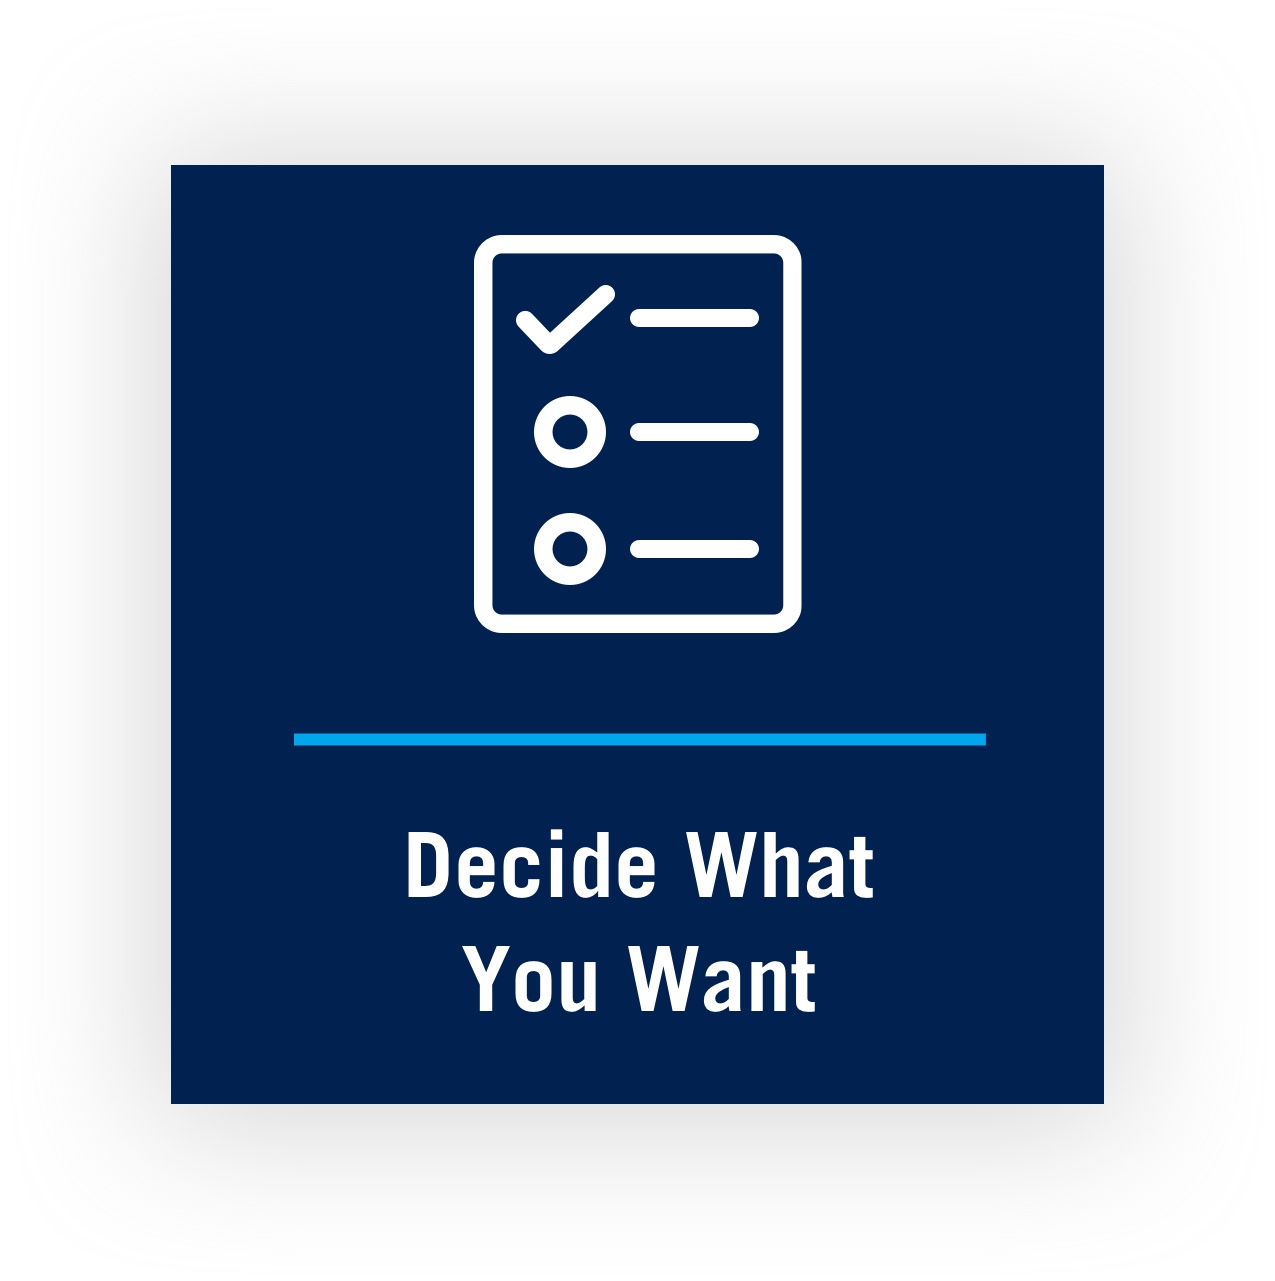 Decide what you want image